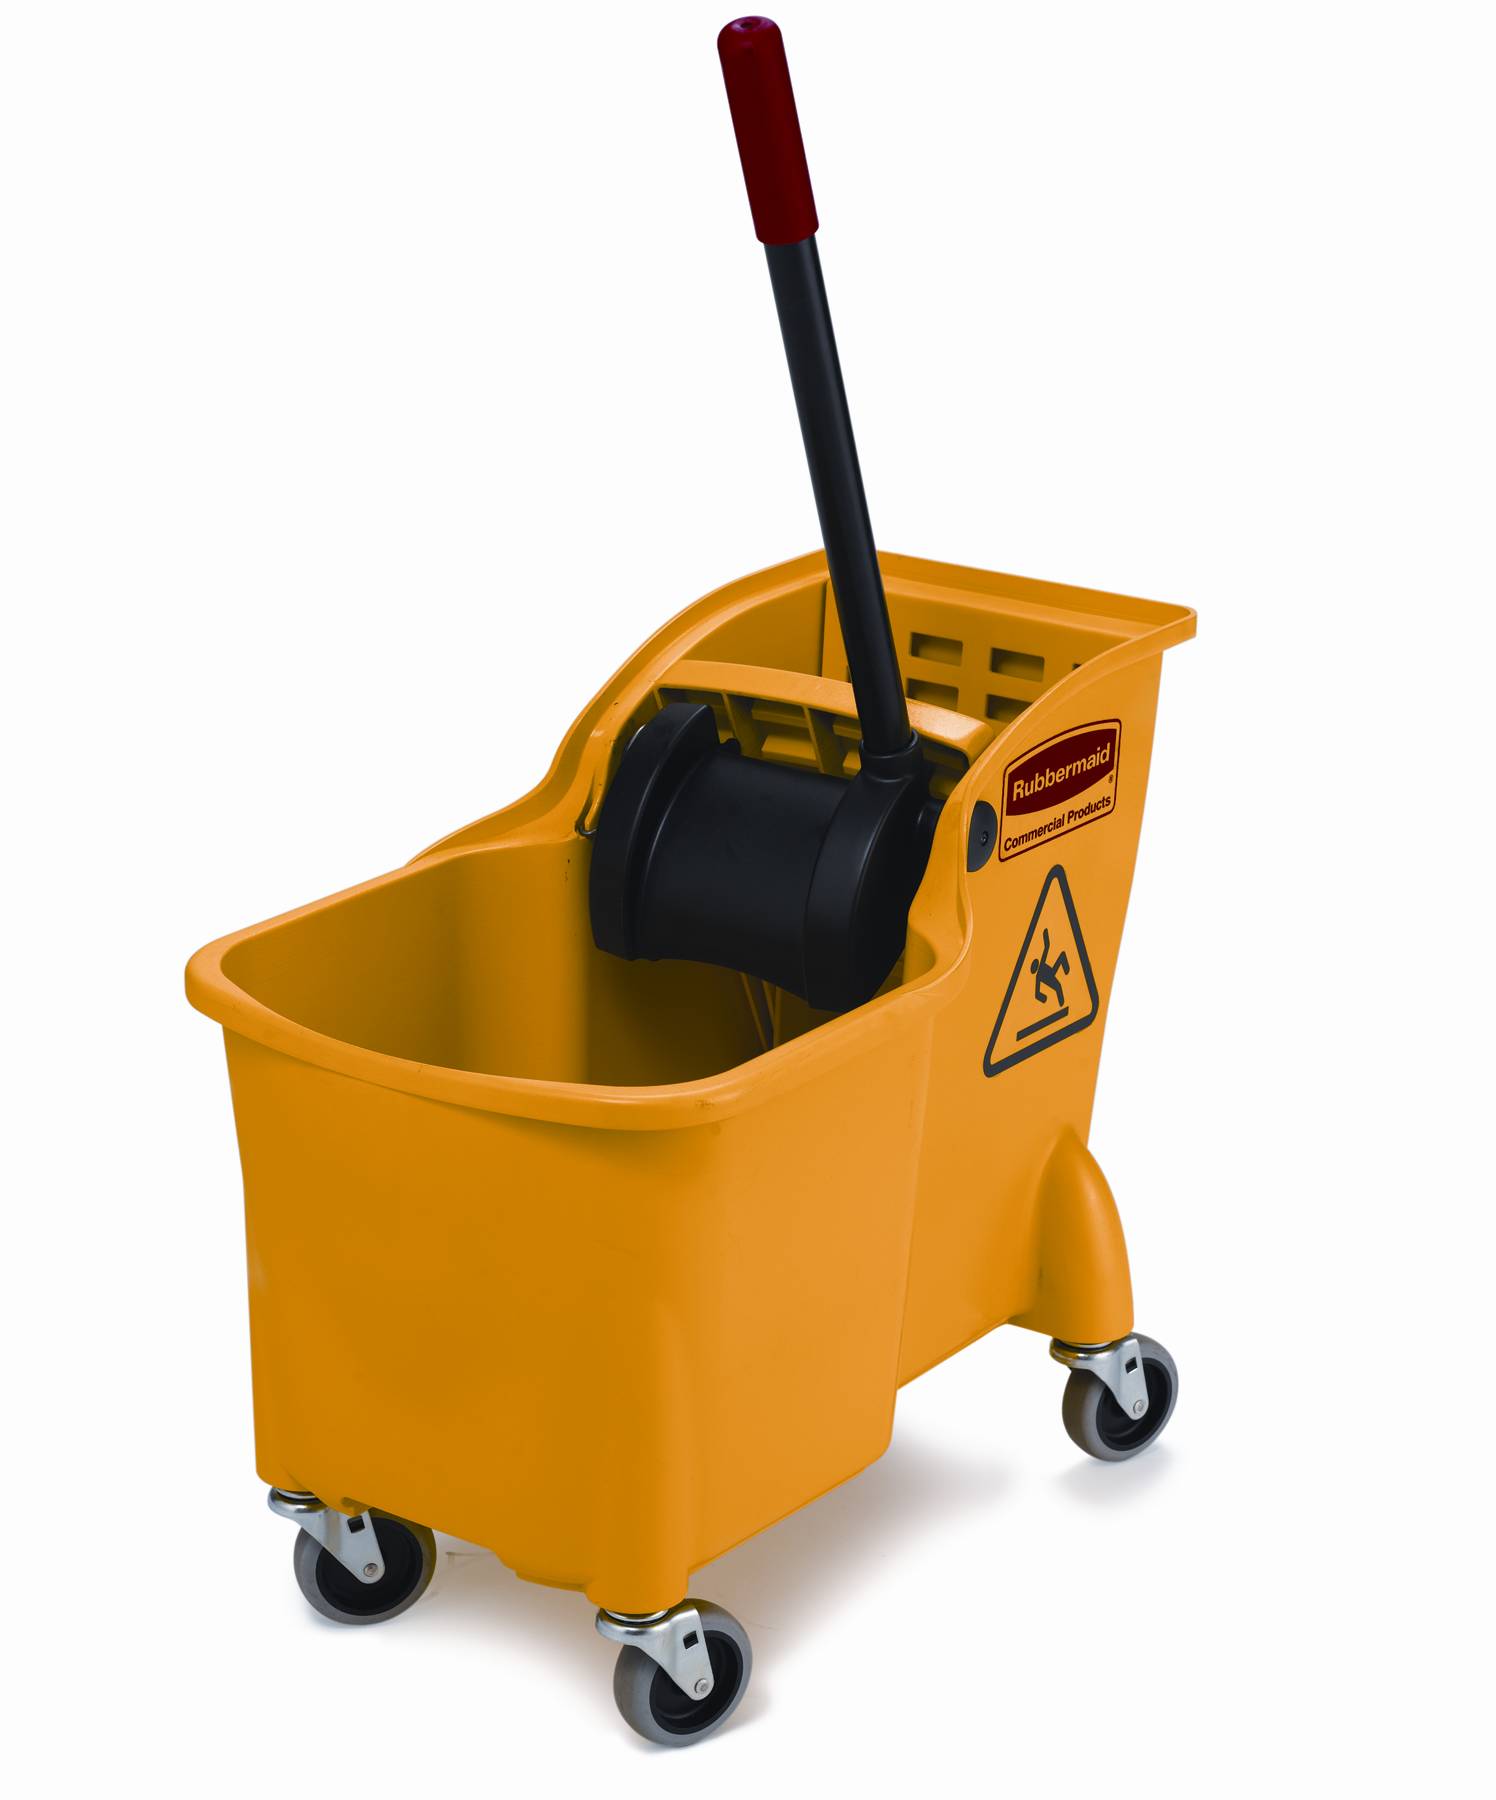 how to put together a rubbermaid mop bucket?